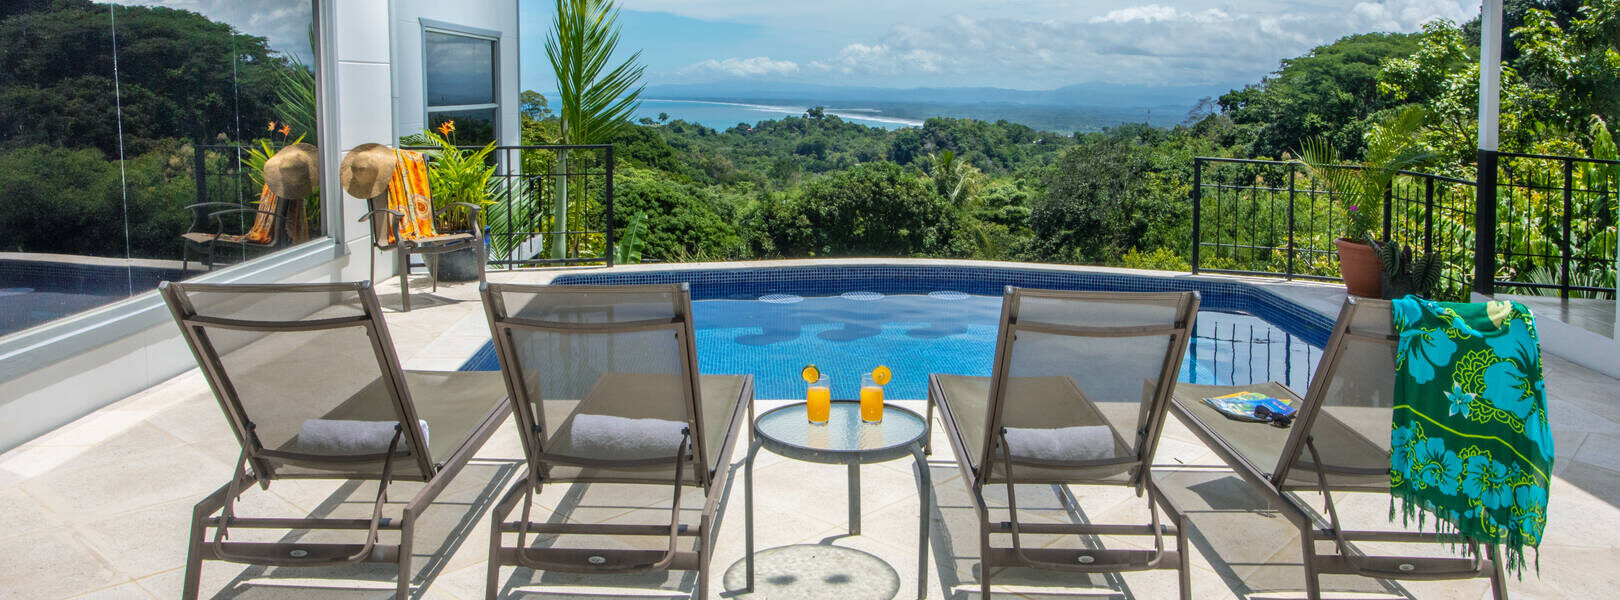 The property has a beautiful pool with underwater seating. The perfect spot to sit and admire the jungle.